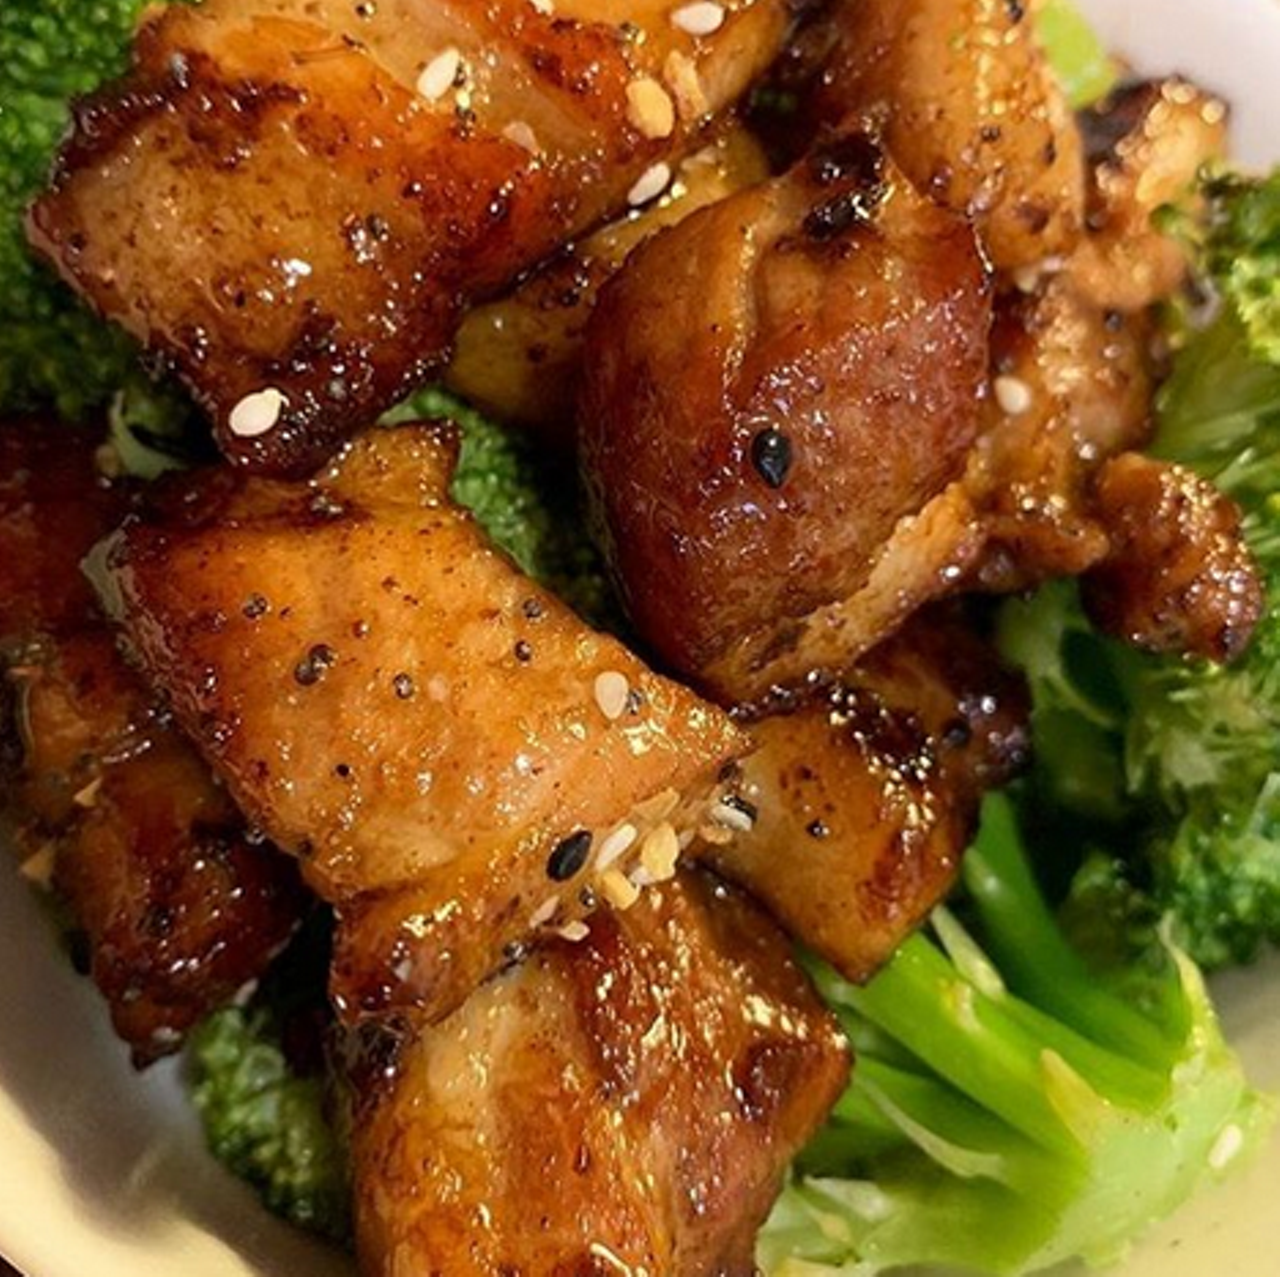 Peng’s Chinatown Chinese
3211 Wurzbach Road, (210) 681-2345, doordash.com
You can order takeout or delivery from this longstanding family-owned restaurant through DoorDash. 
Photo via Instagram  /  
sashalainefit